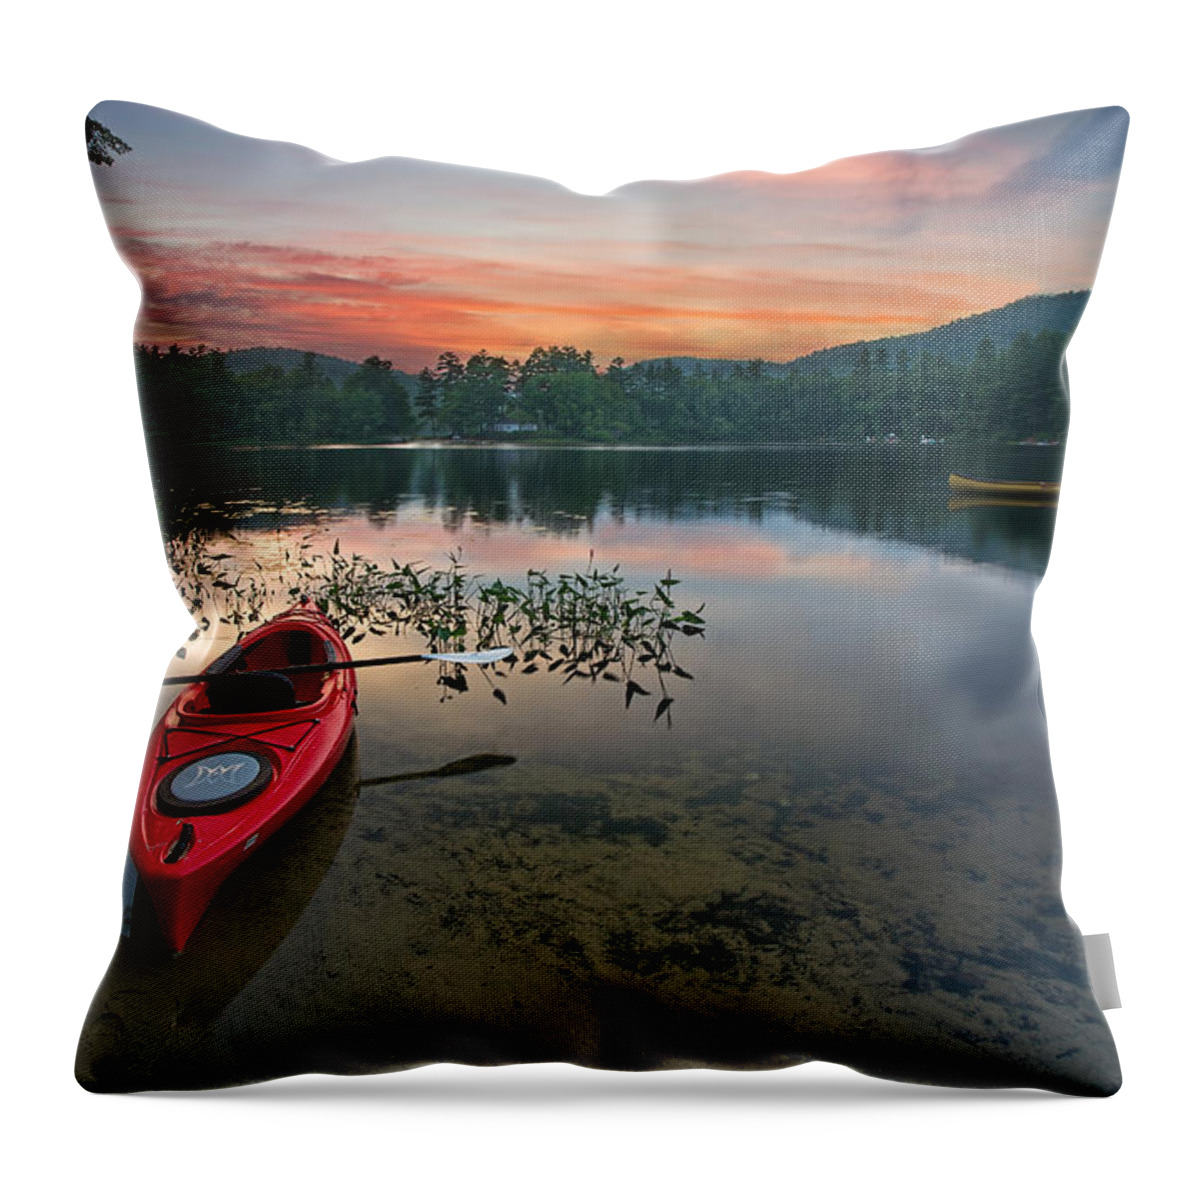 Landscape Throw Pillow featuring the photograph Red Kayak by Darylann Leonard Photography